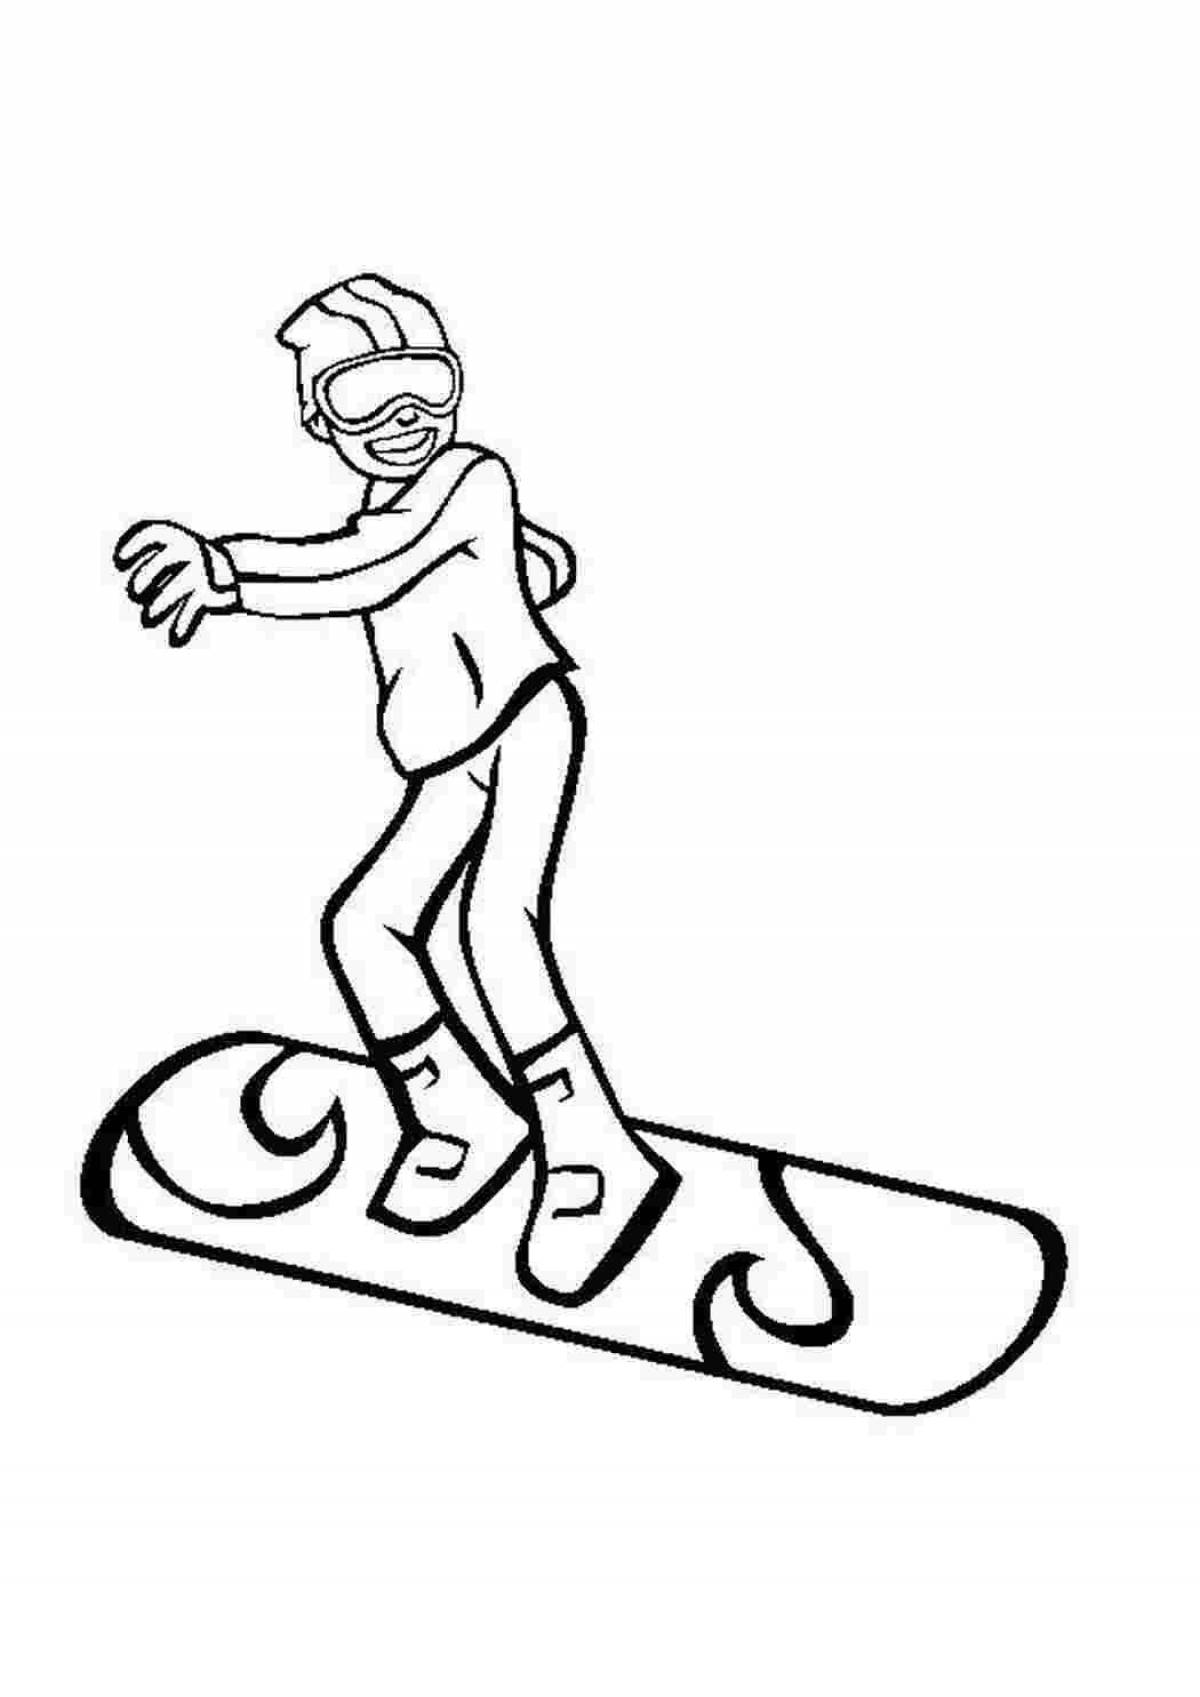 Incredible snowboard coloring book for kids